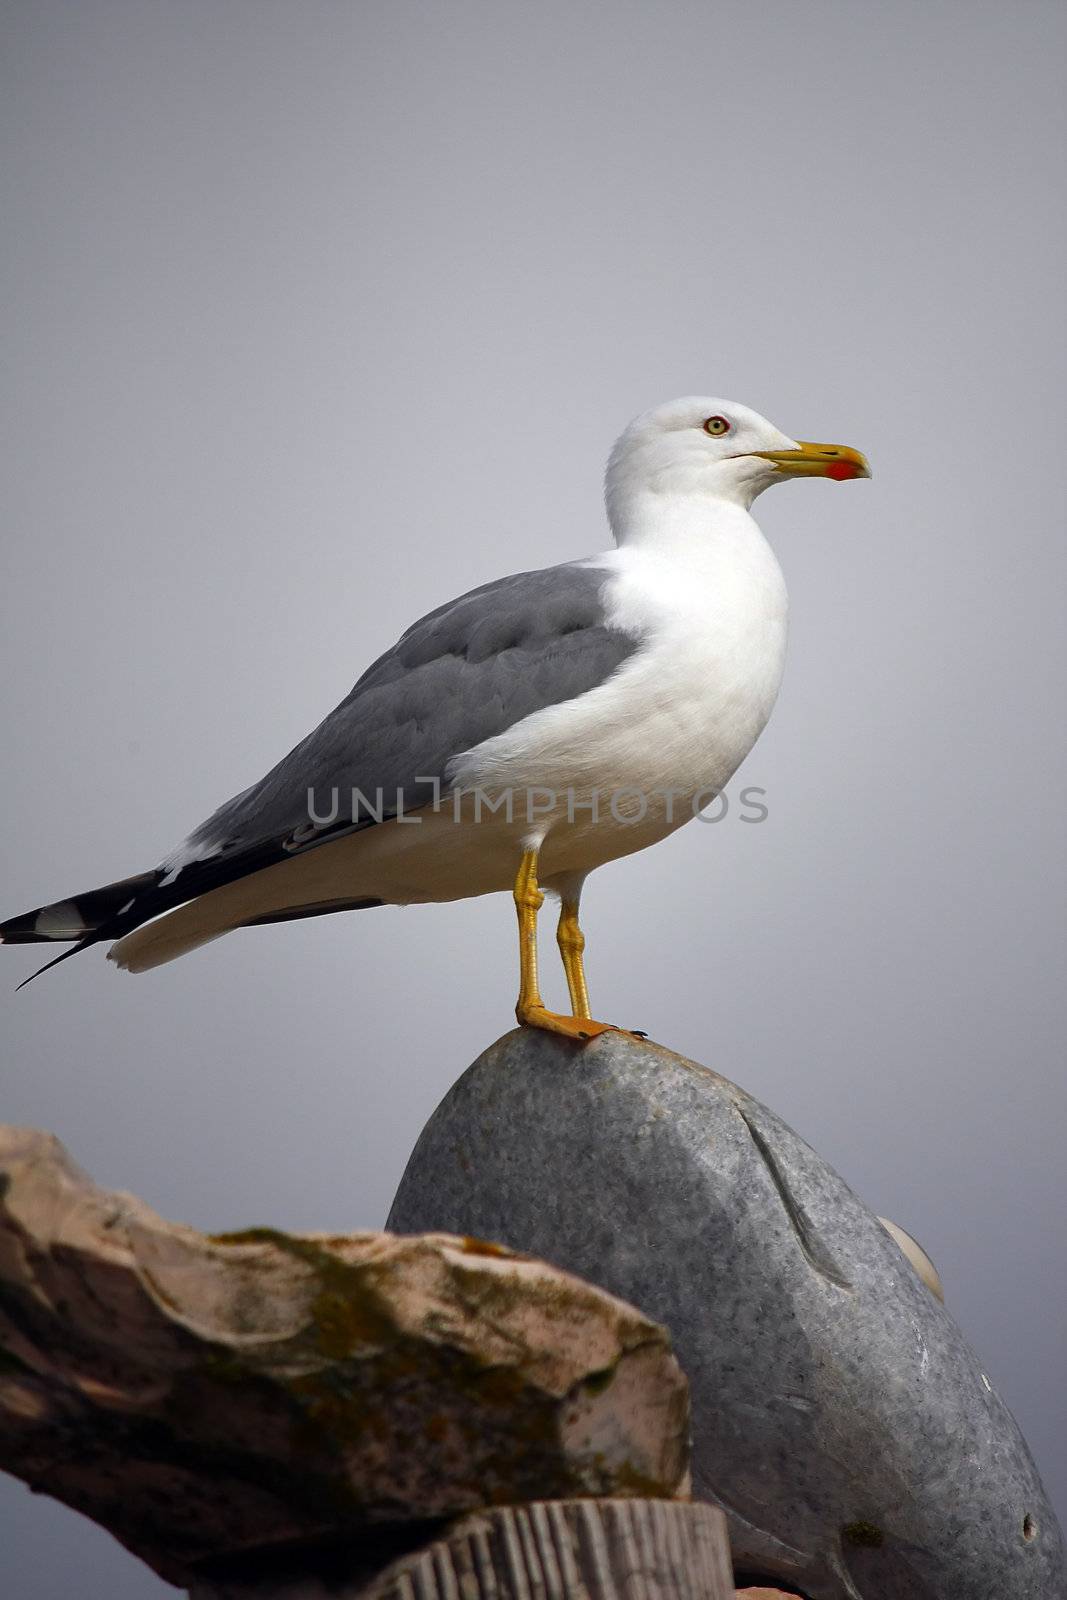 View of an adult yellow-legged gull on top of a stone statue.